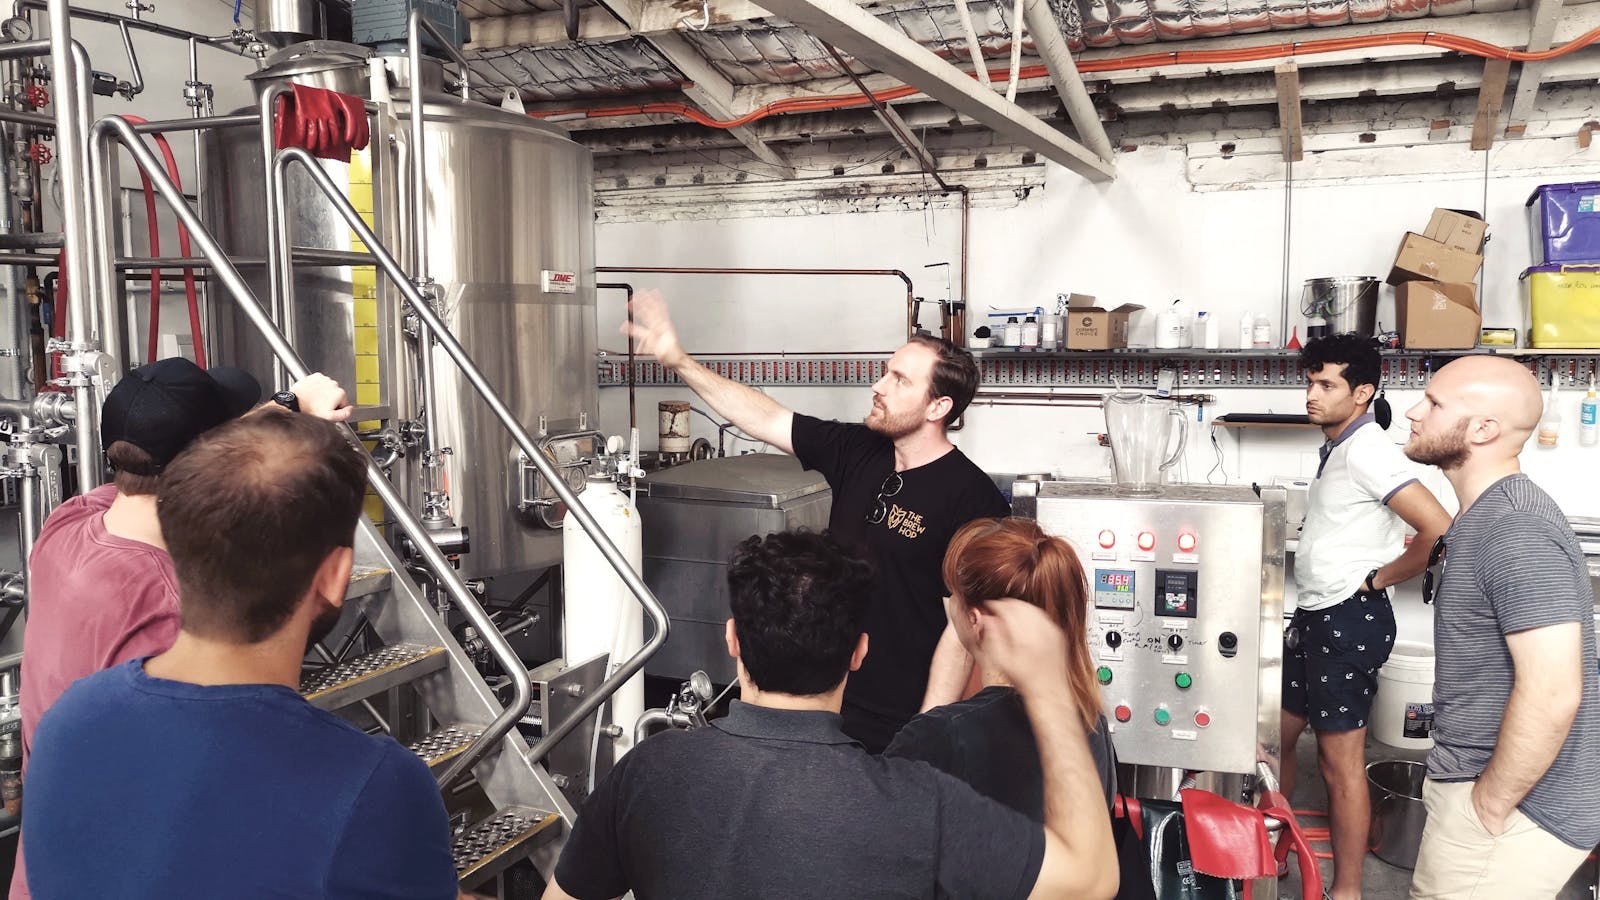 One of the best parts of our tour is being able to see  where your delicious beer is made!